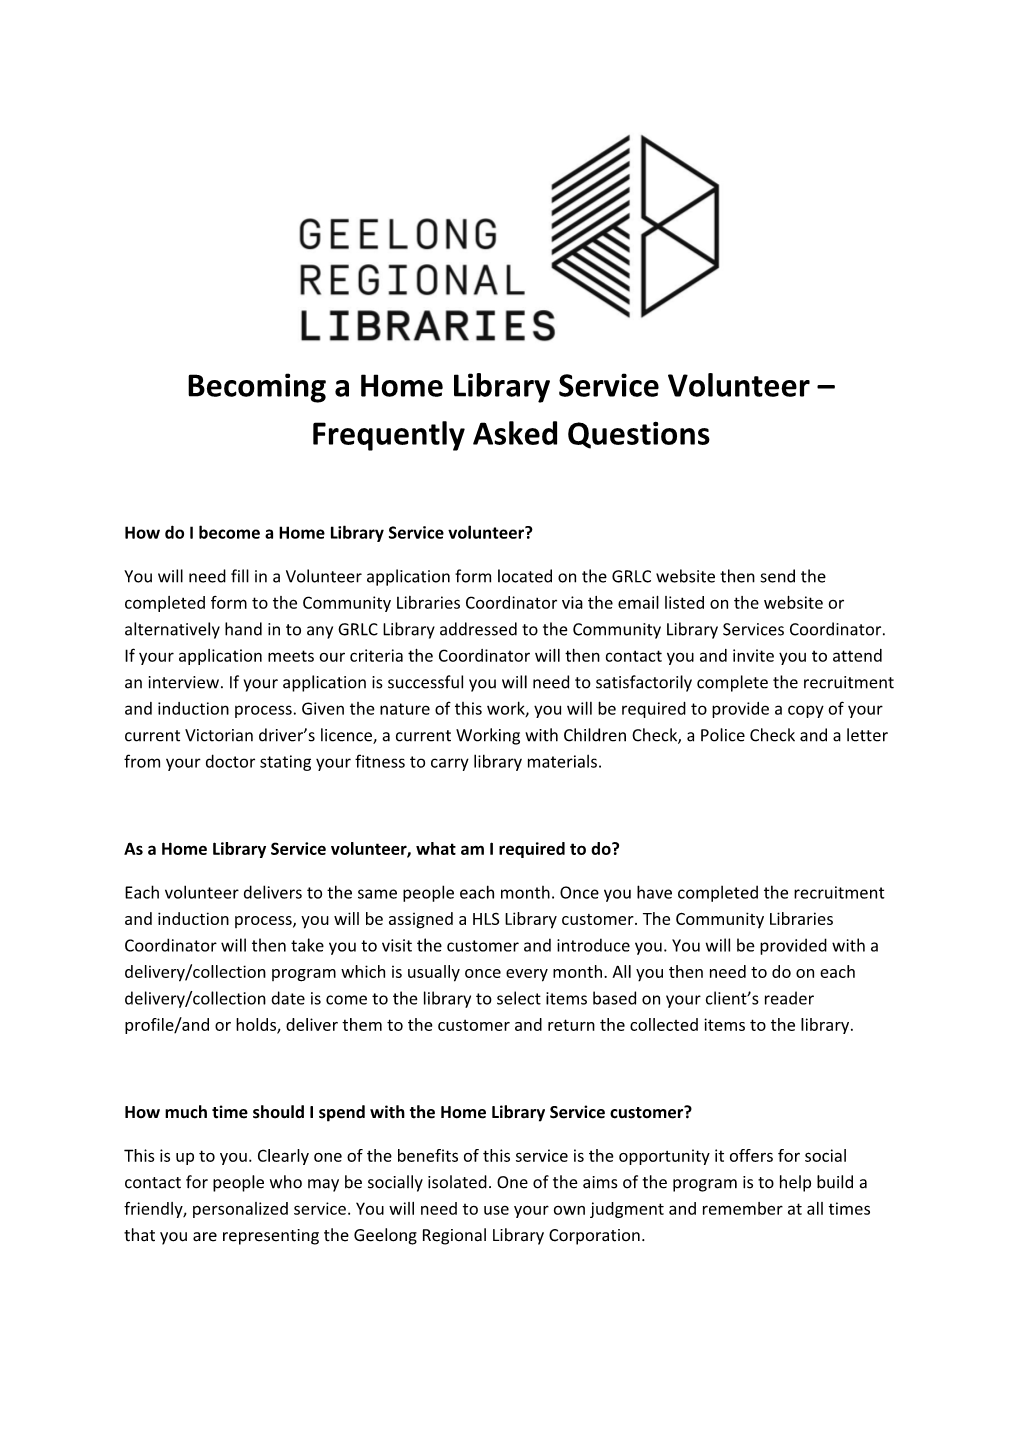 Becoming a Home Library Service Volunteer Frequently Asked Questions